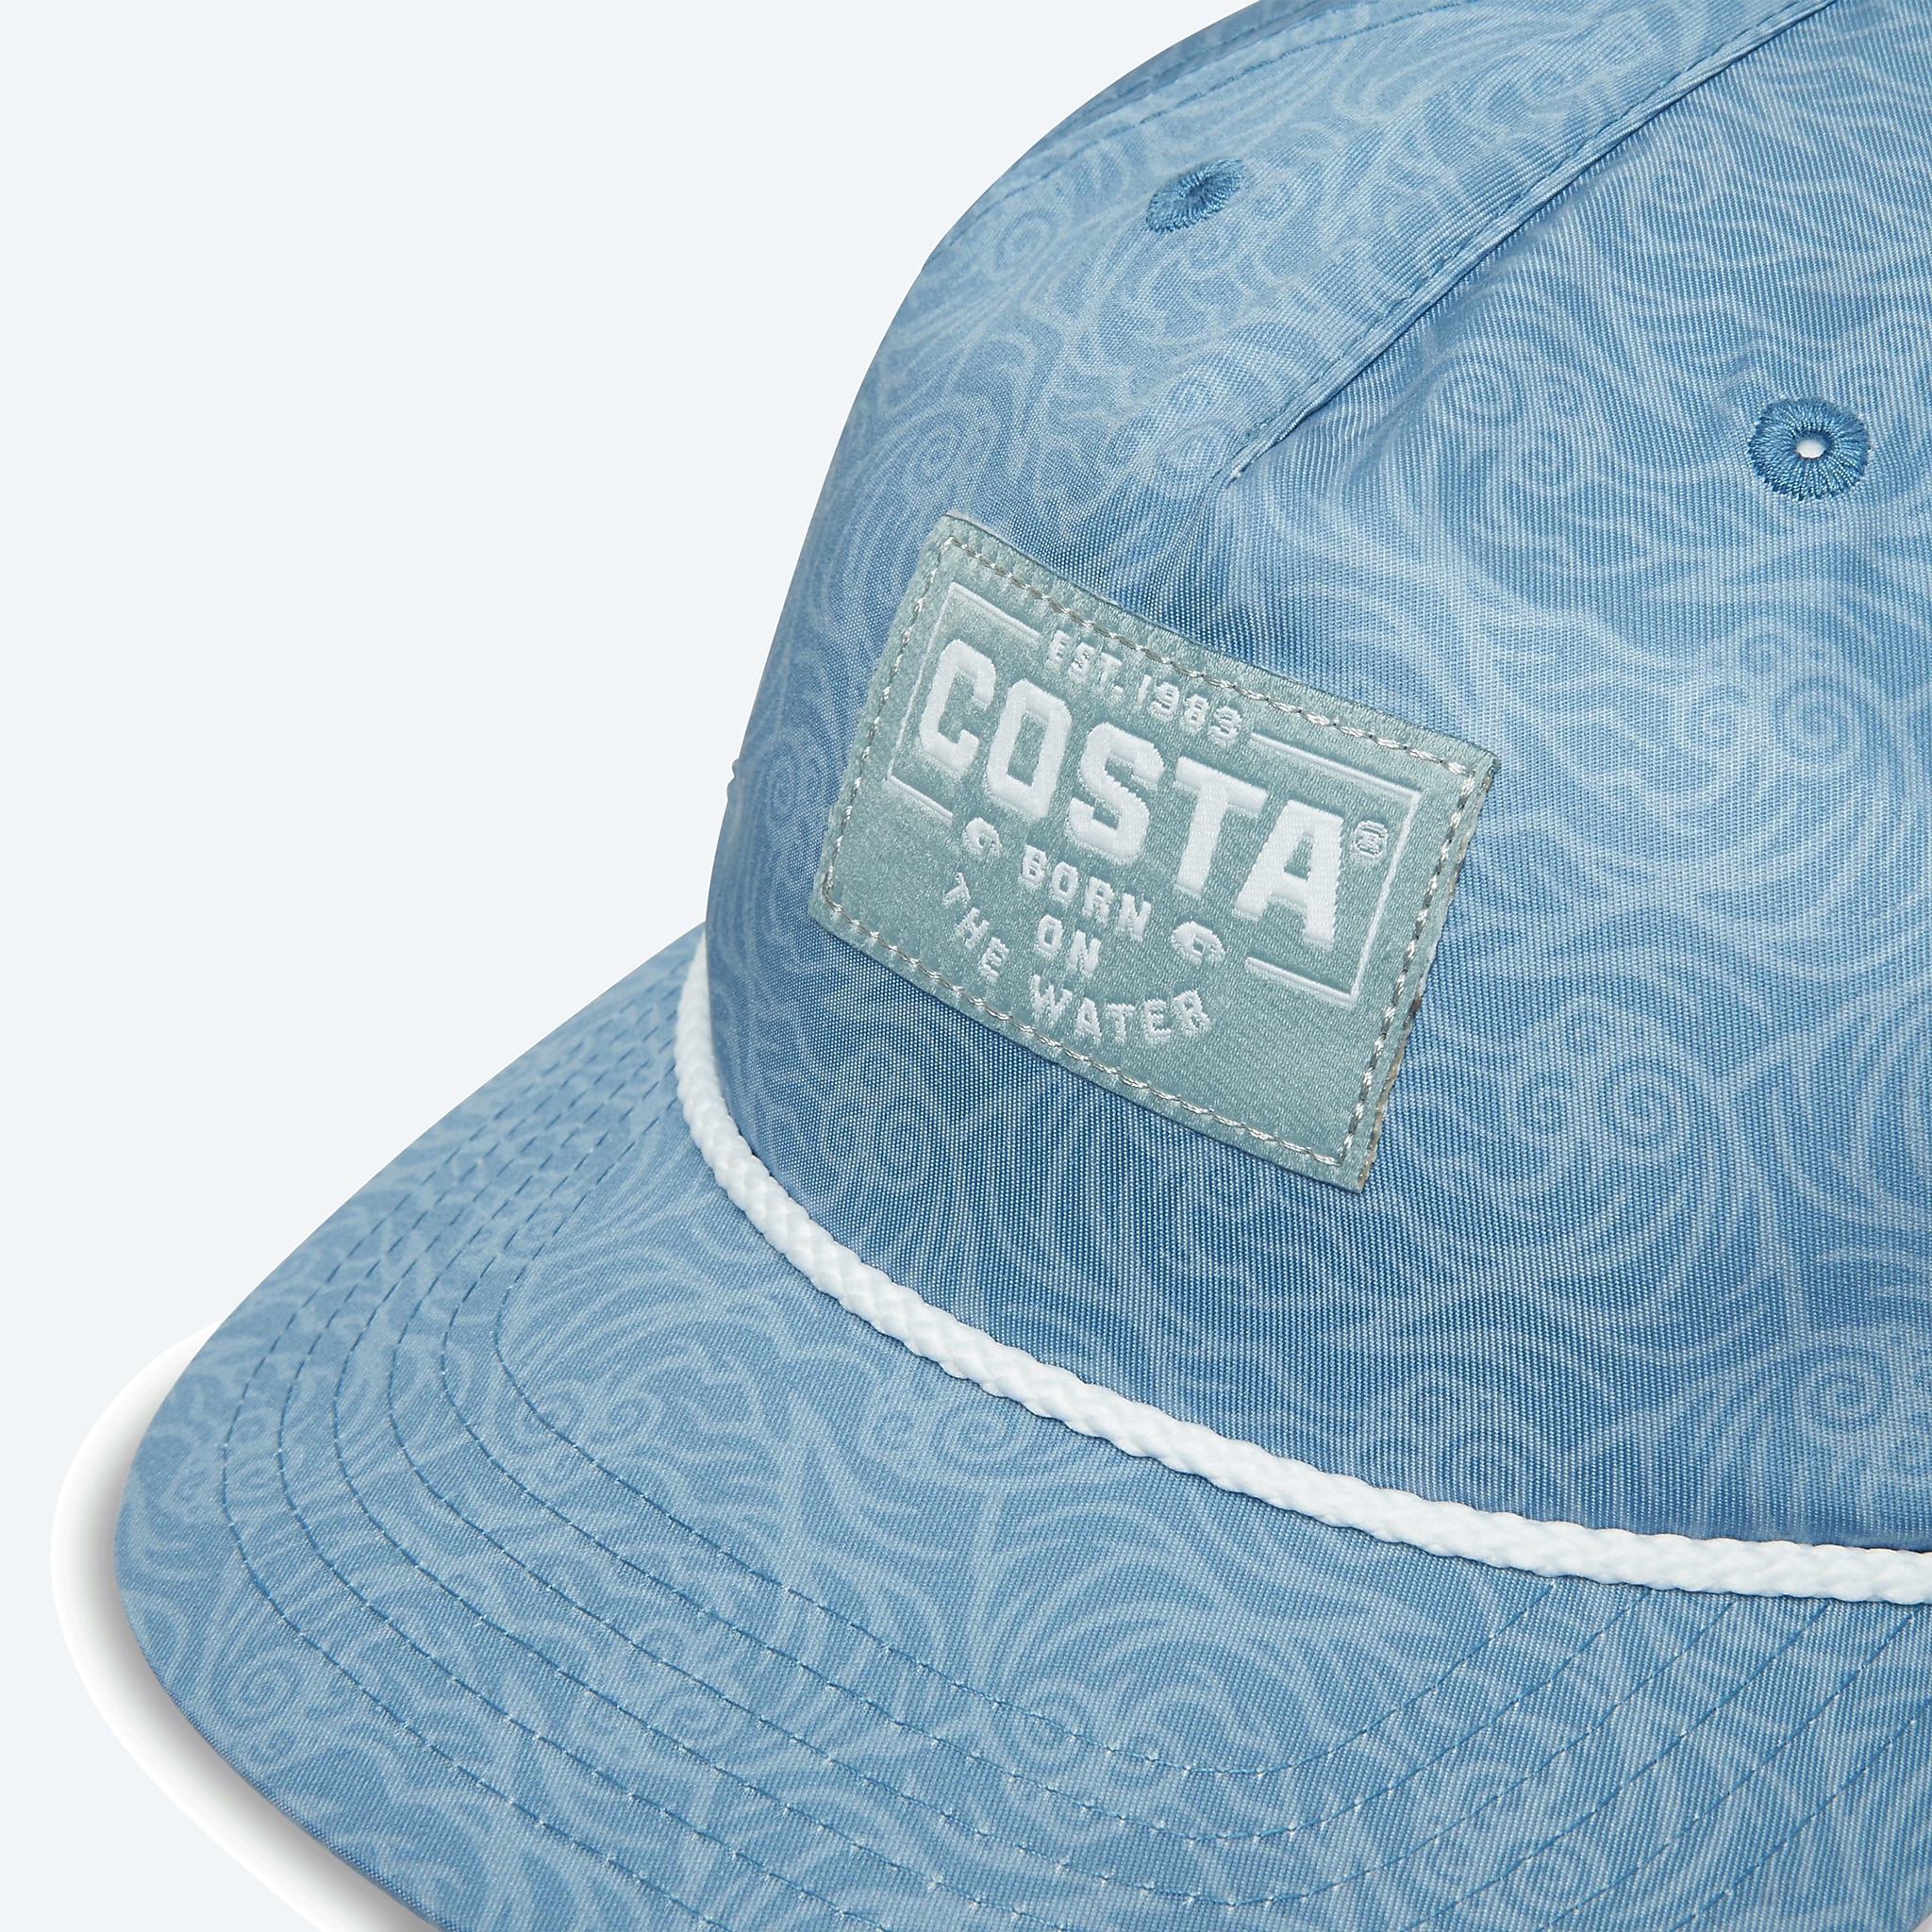 Printed Unstructured Hat